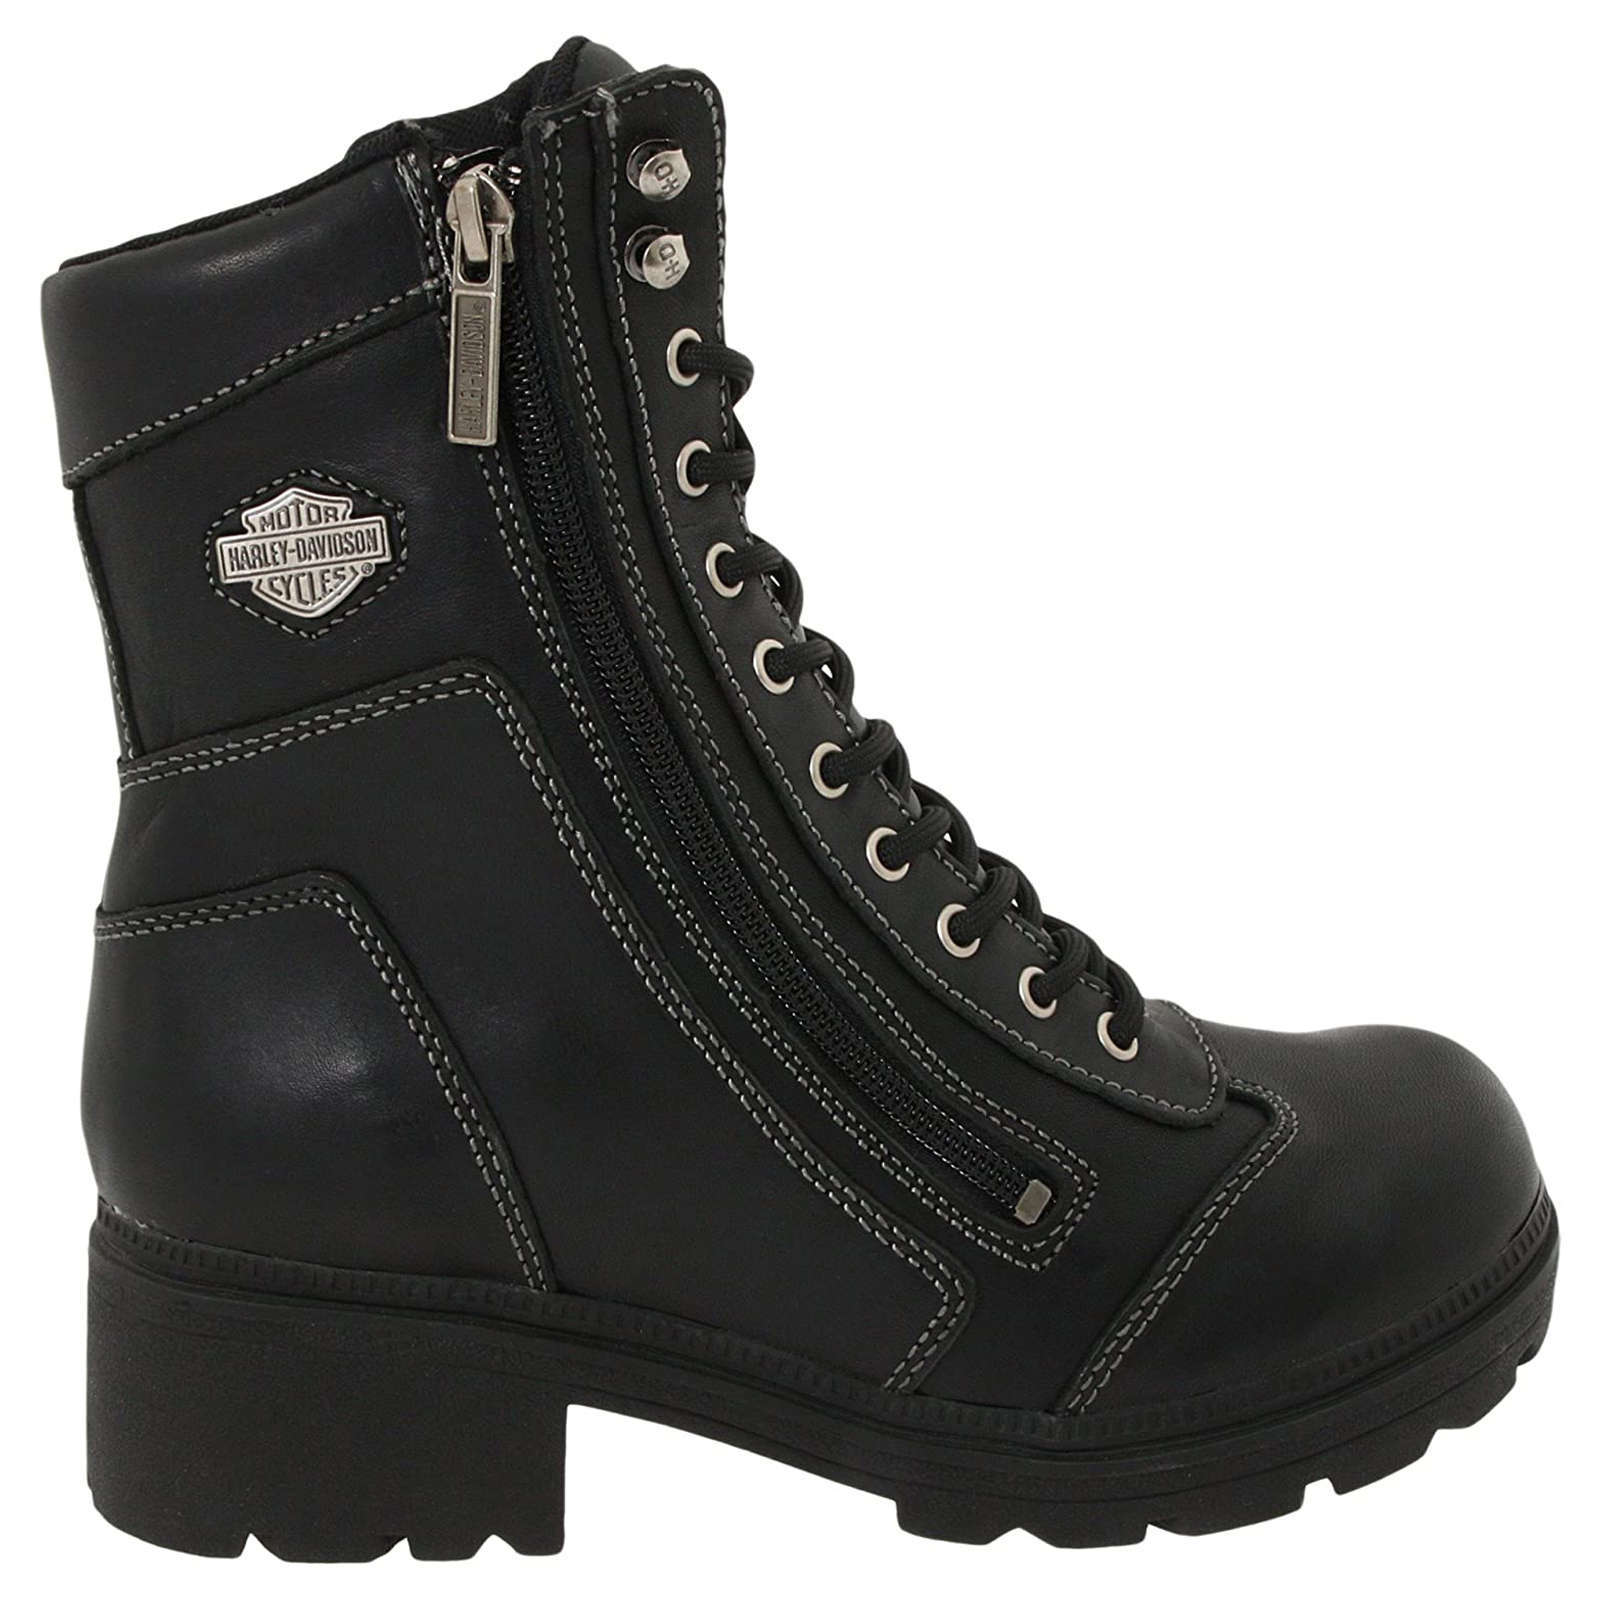 Harley Davidson Tessa Full Grain Leather Women's Mid High Riding Boots#color_black